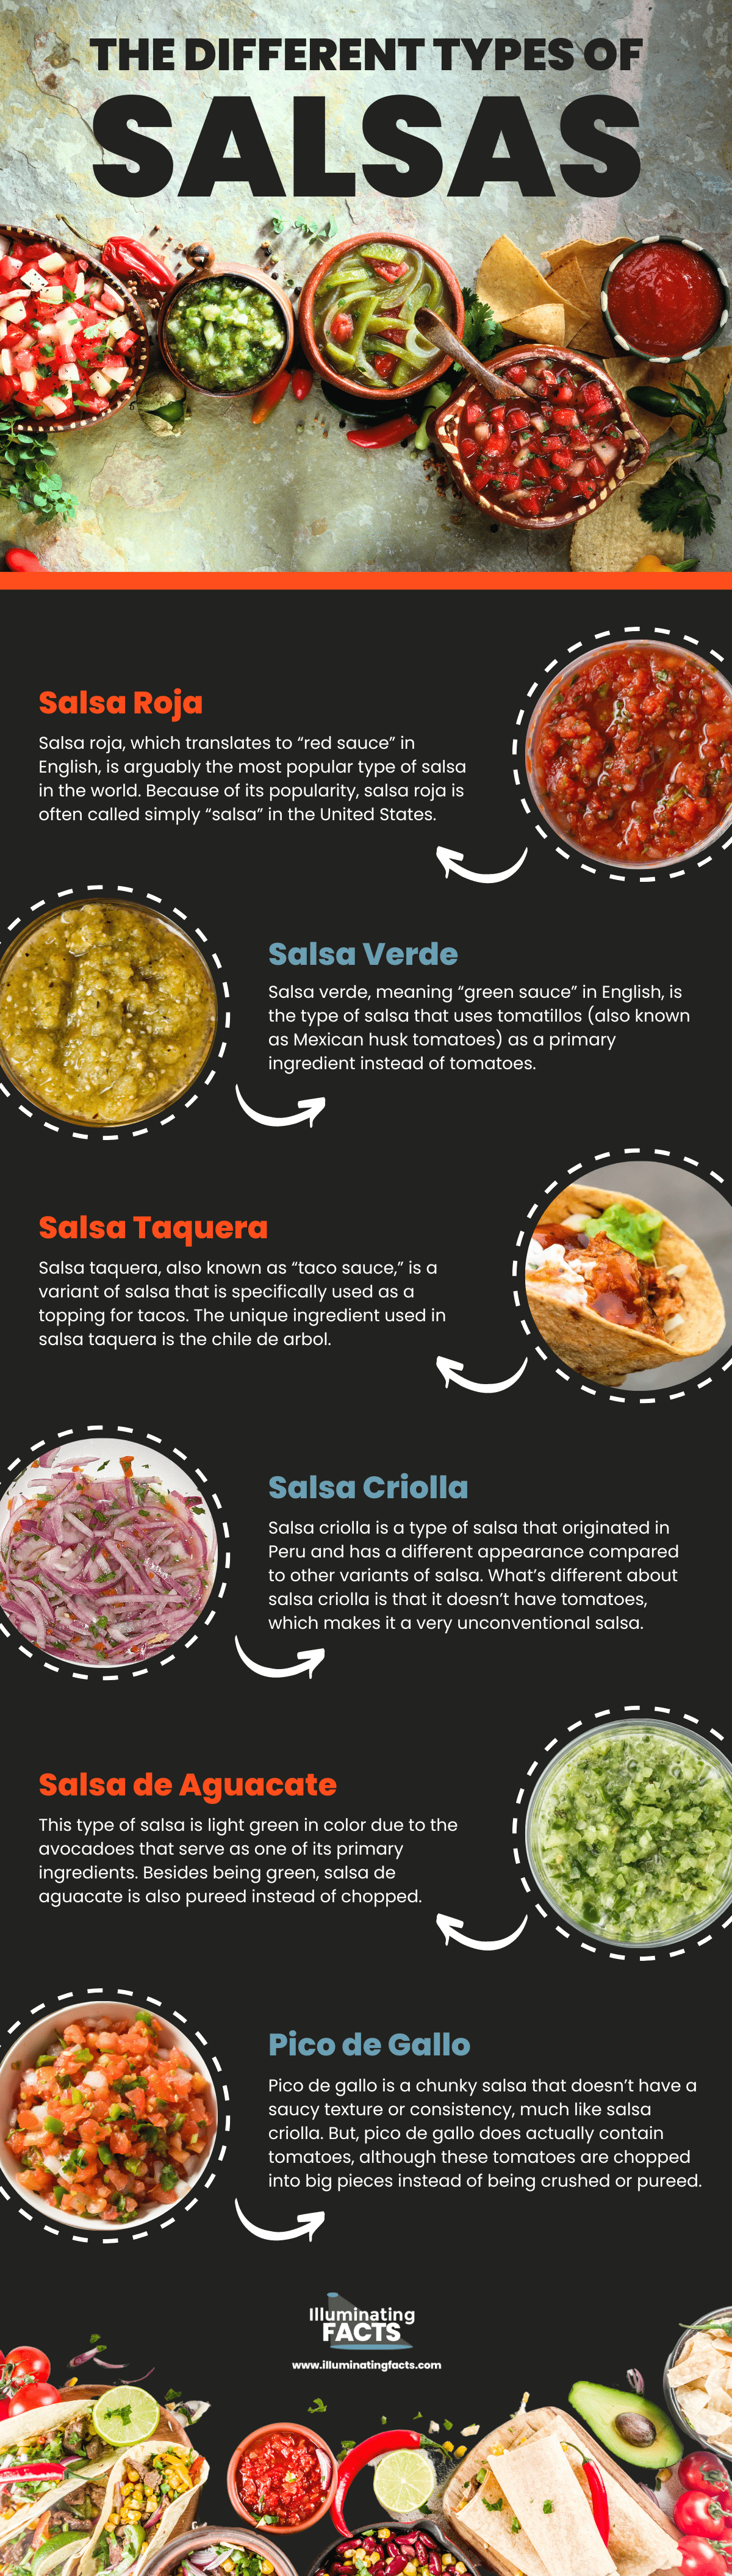 The Different Types of Salsas